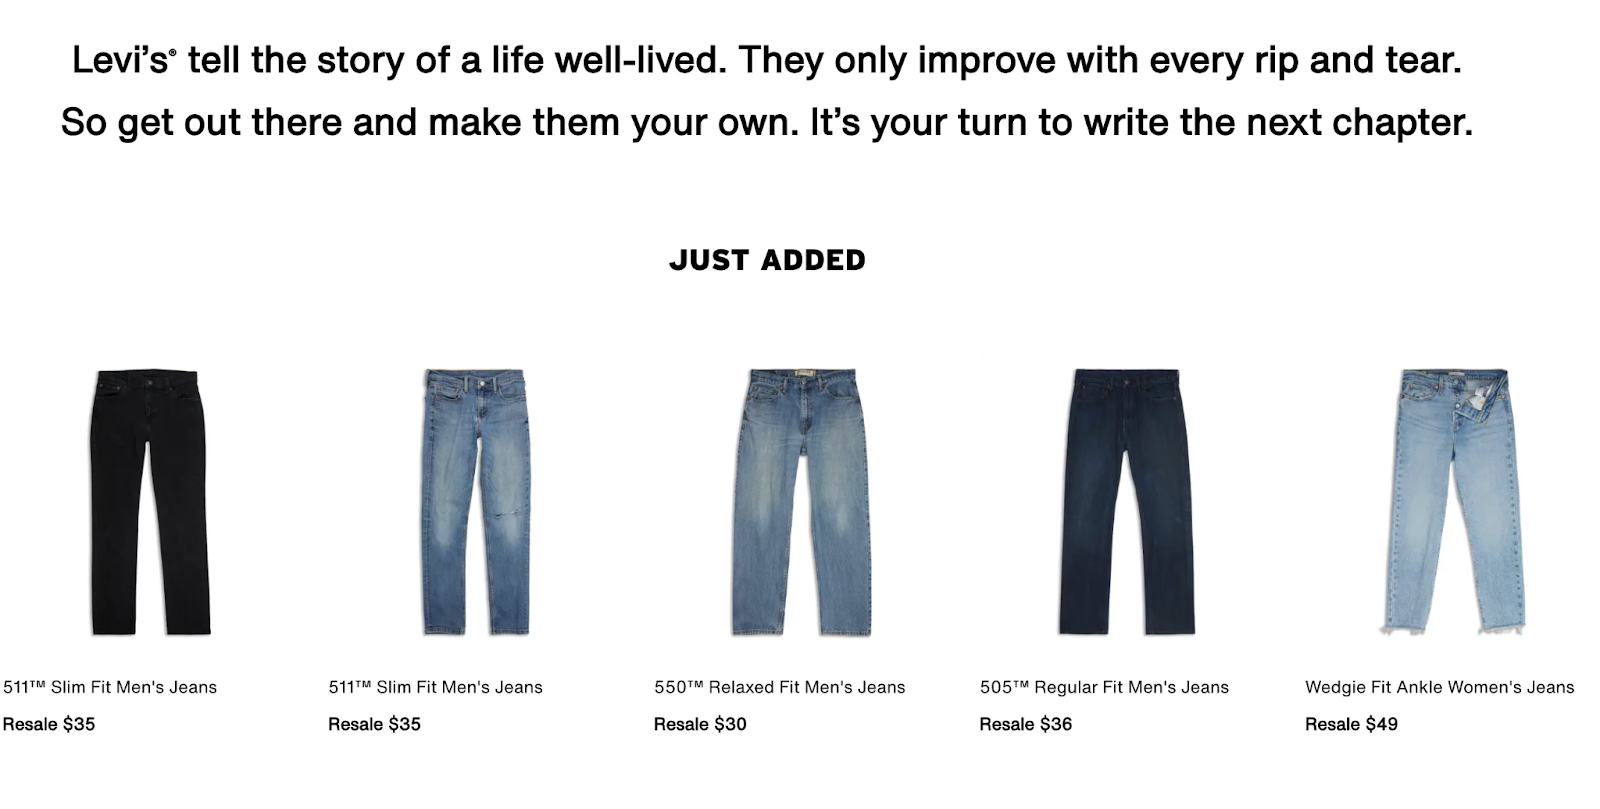 Levi’s SecondHand homepage features different pre-worn jeans at their resale price